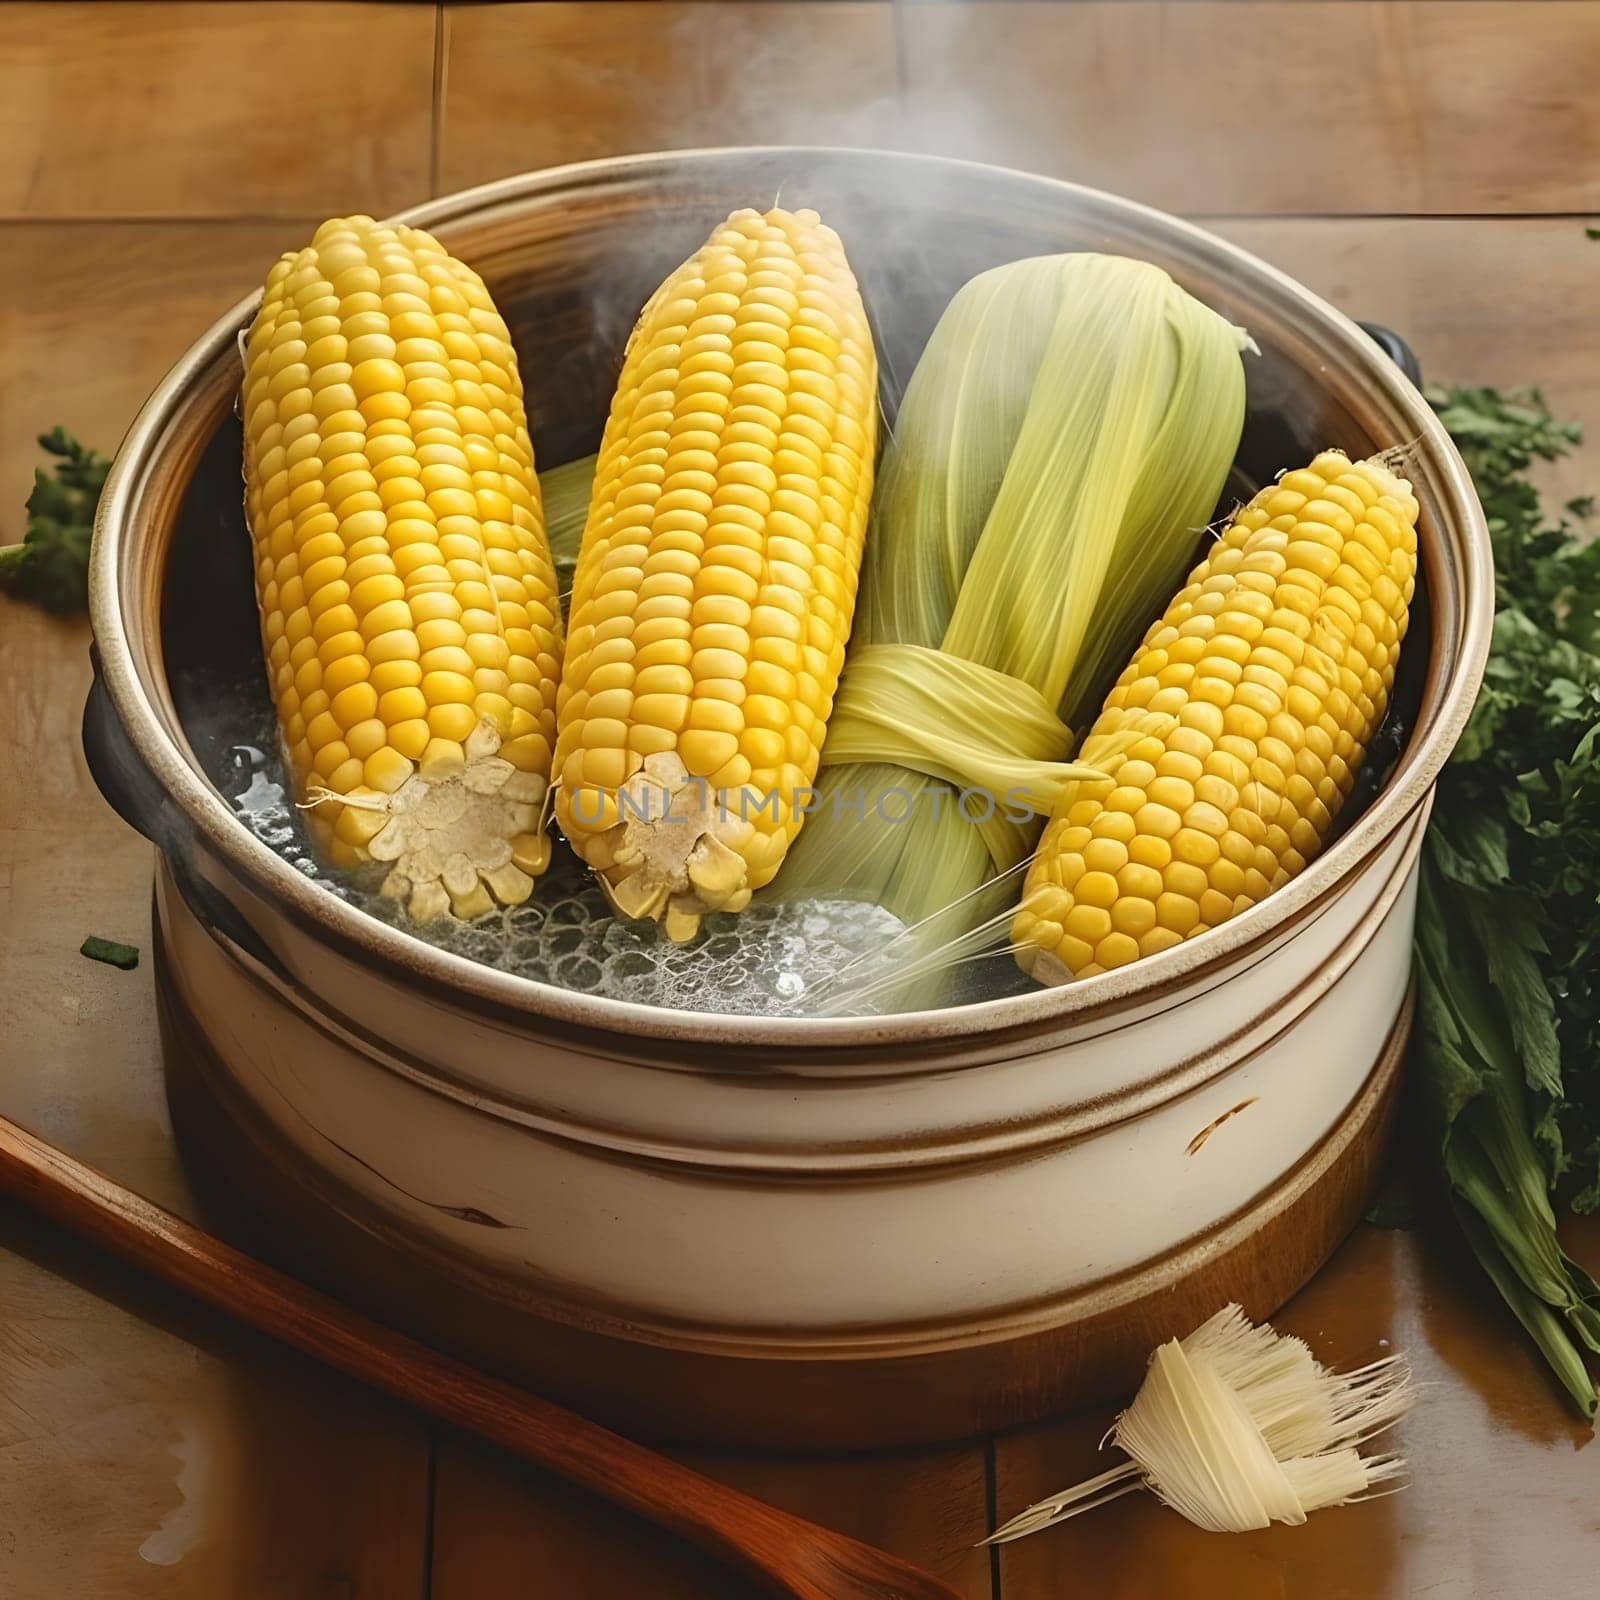 Yellow corn cobs in a pot while cooking. Corn as a dish of thanksgiving for the harvest. An atmosphere of joy and celebration.